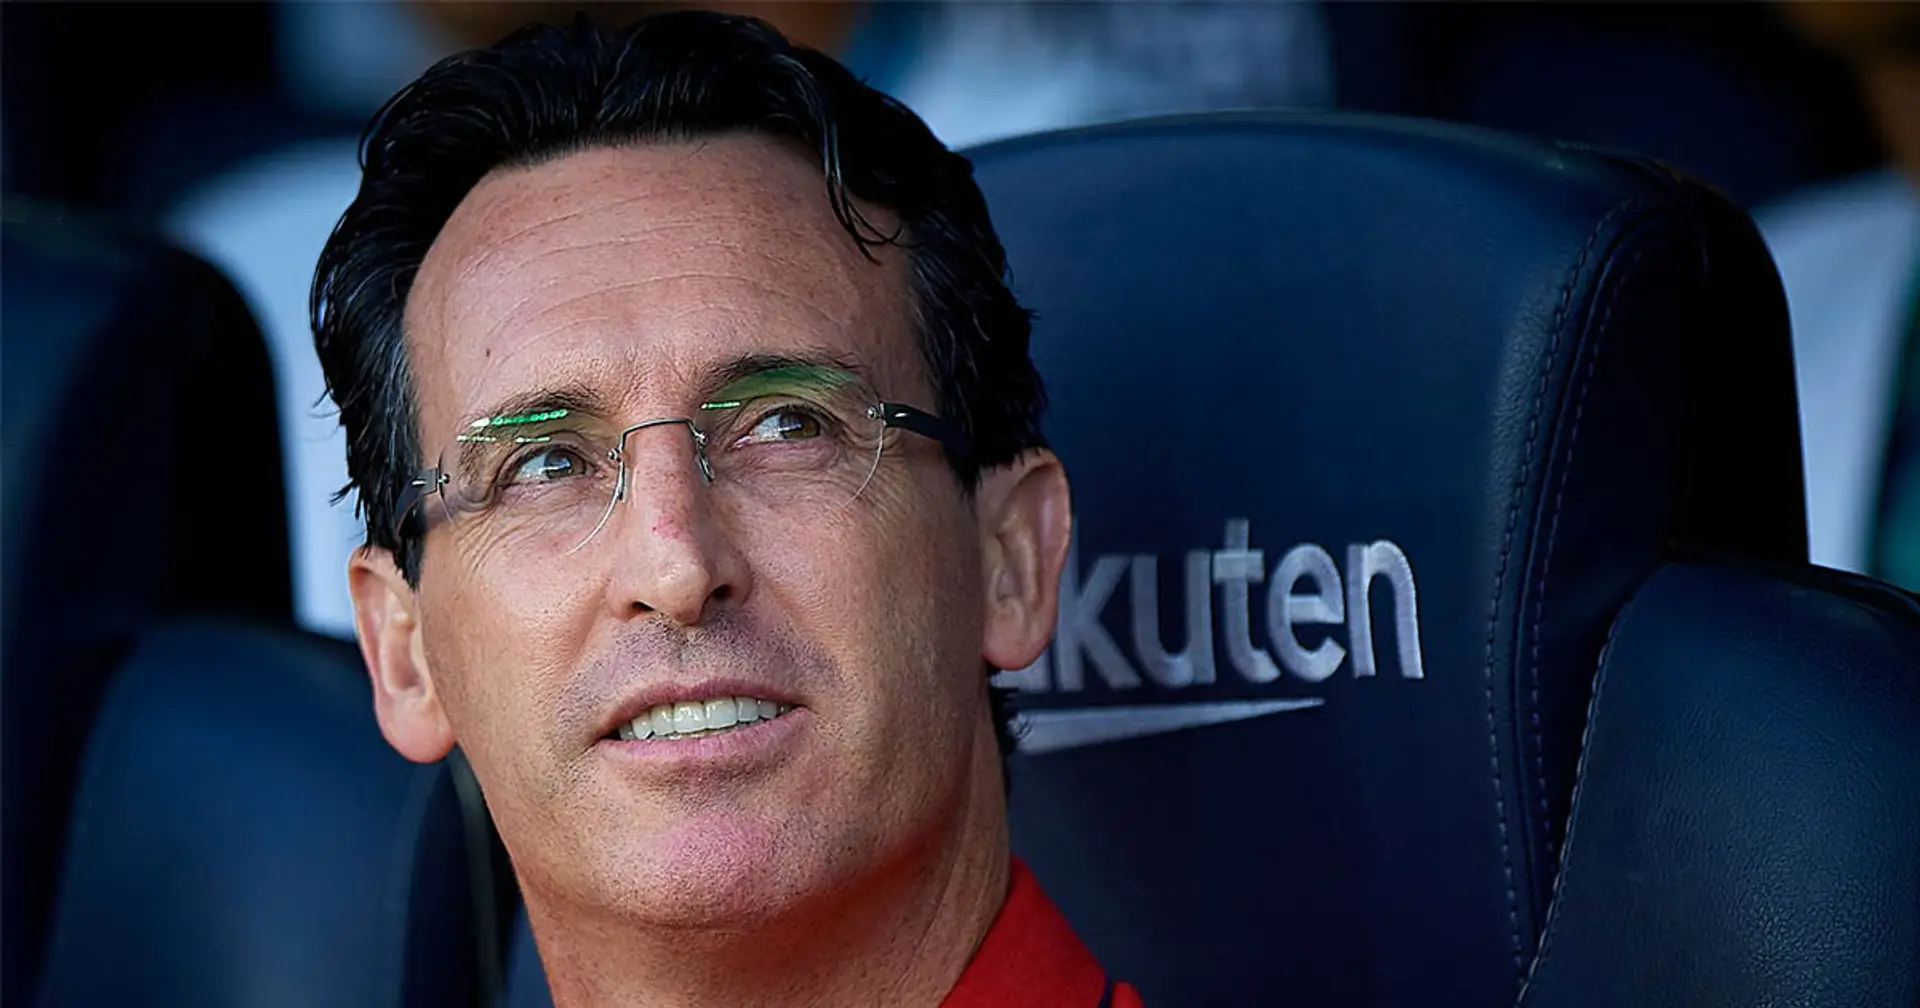 Easy start for Barca? Stats show Villarreal's Unai Emery has never been lucky enough at Camp Nou